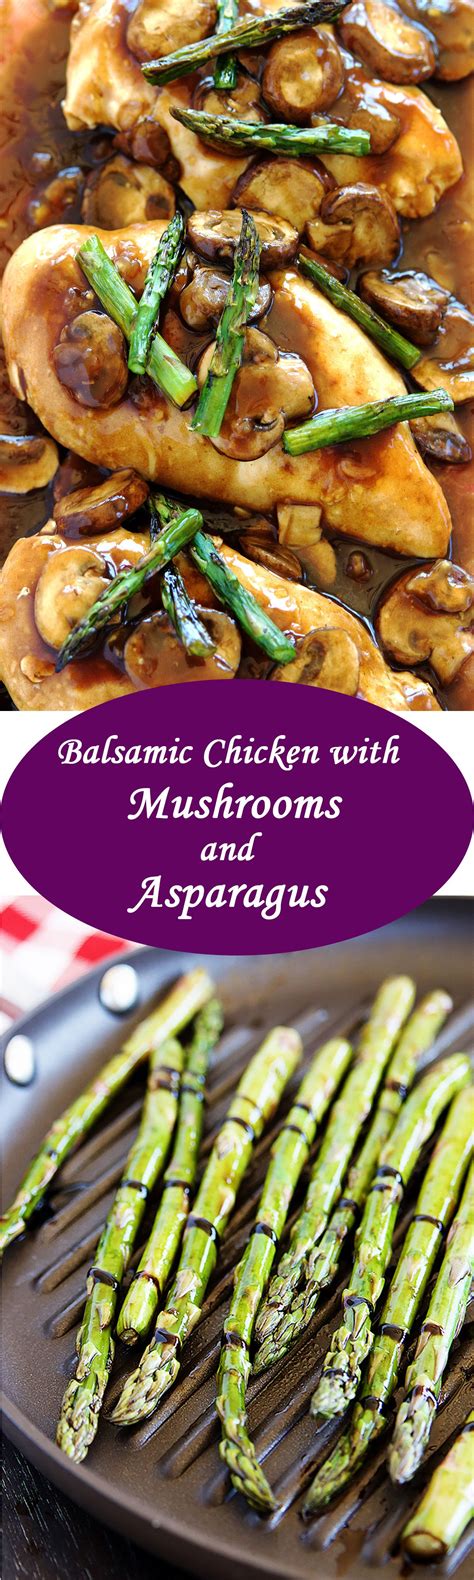 Balsamic Chicken with Mushrooms and Asparagus - Fitness Food Diva ...